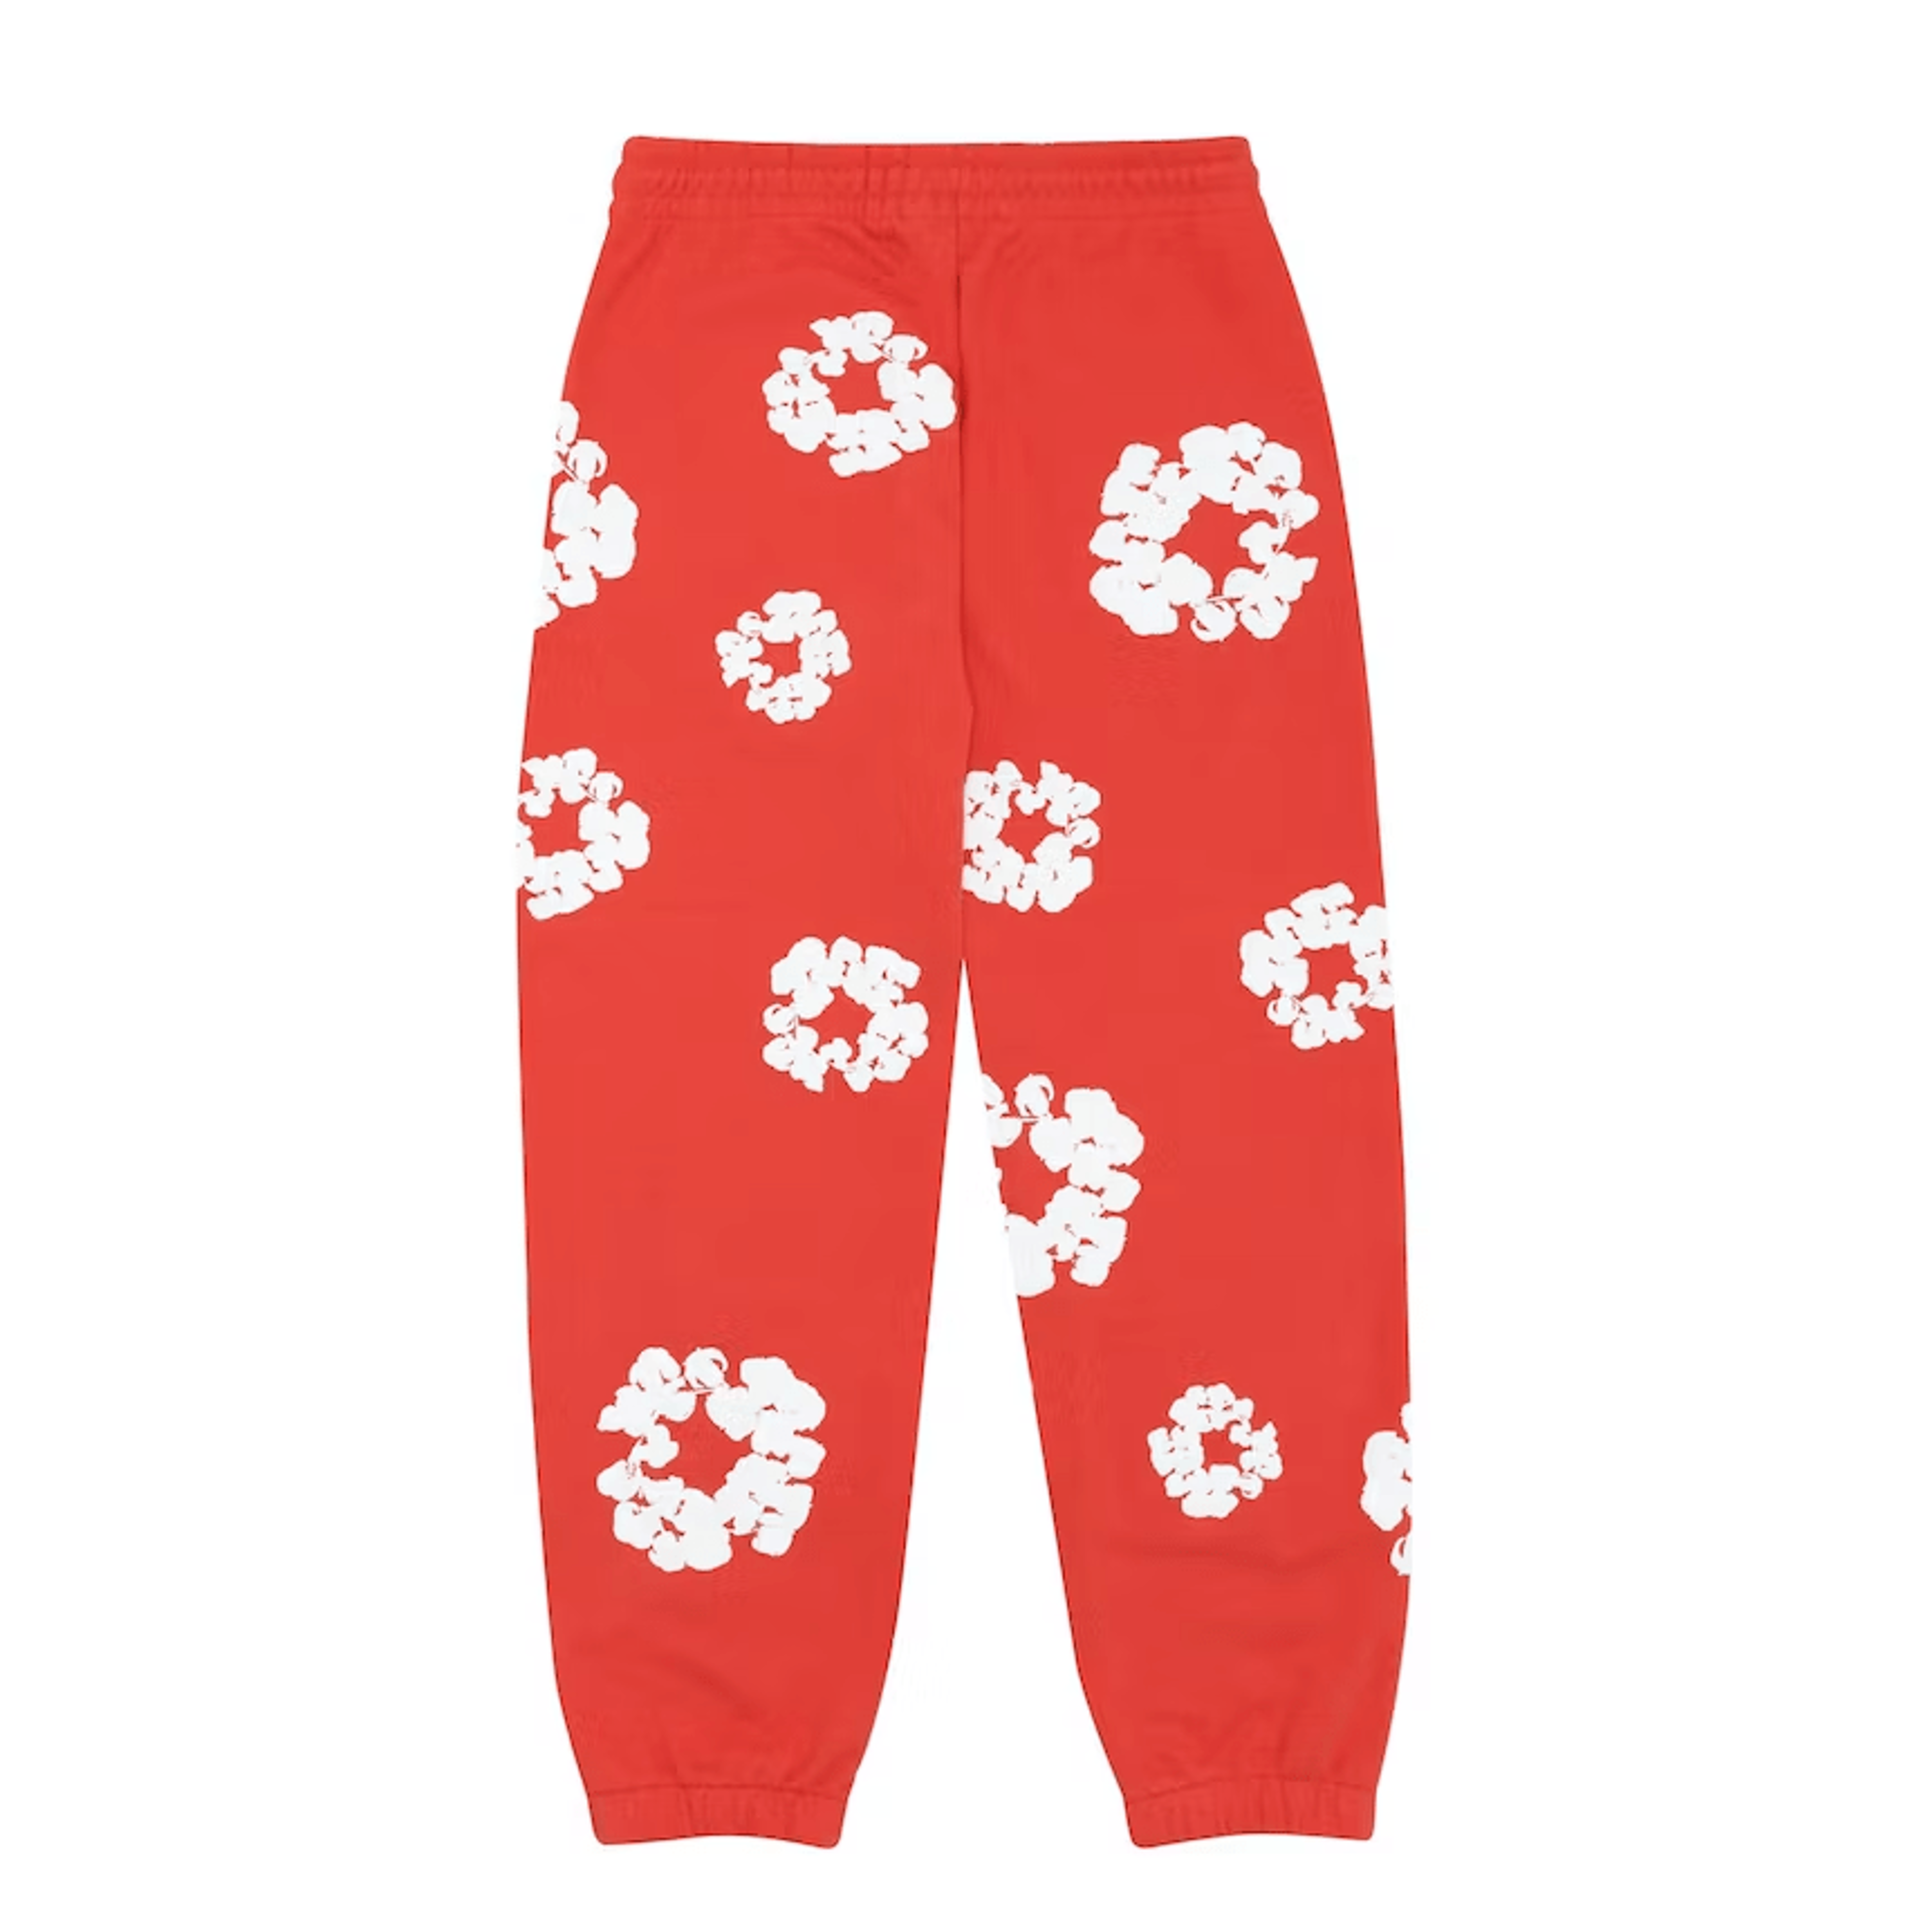 Alternate View 1 of Denim Tears The Cotton Wreath Sweatpants Red